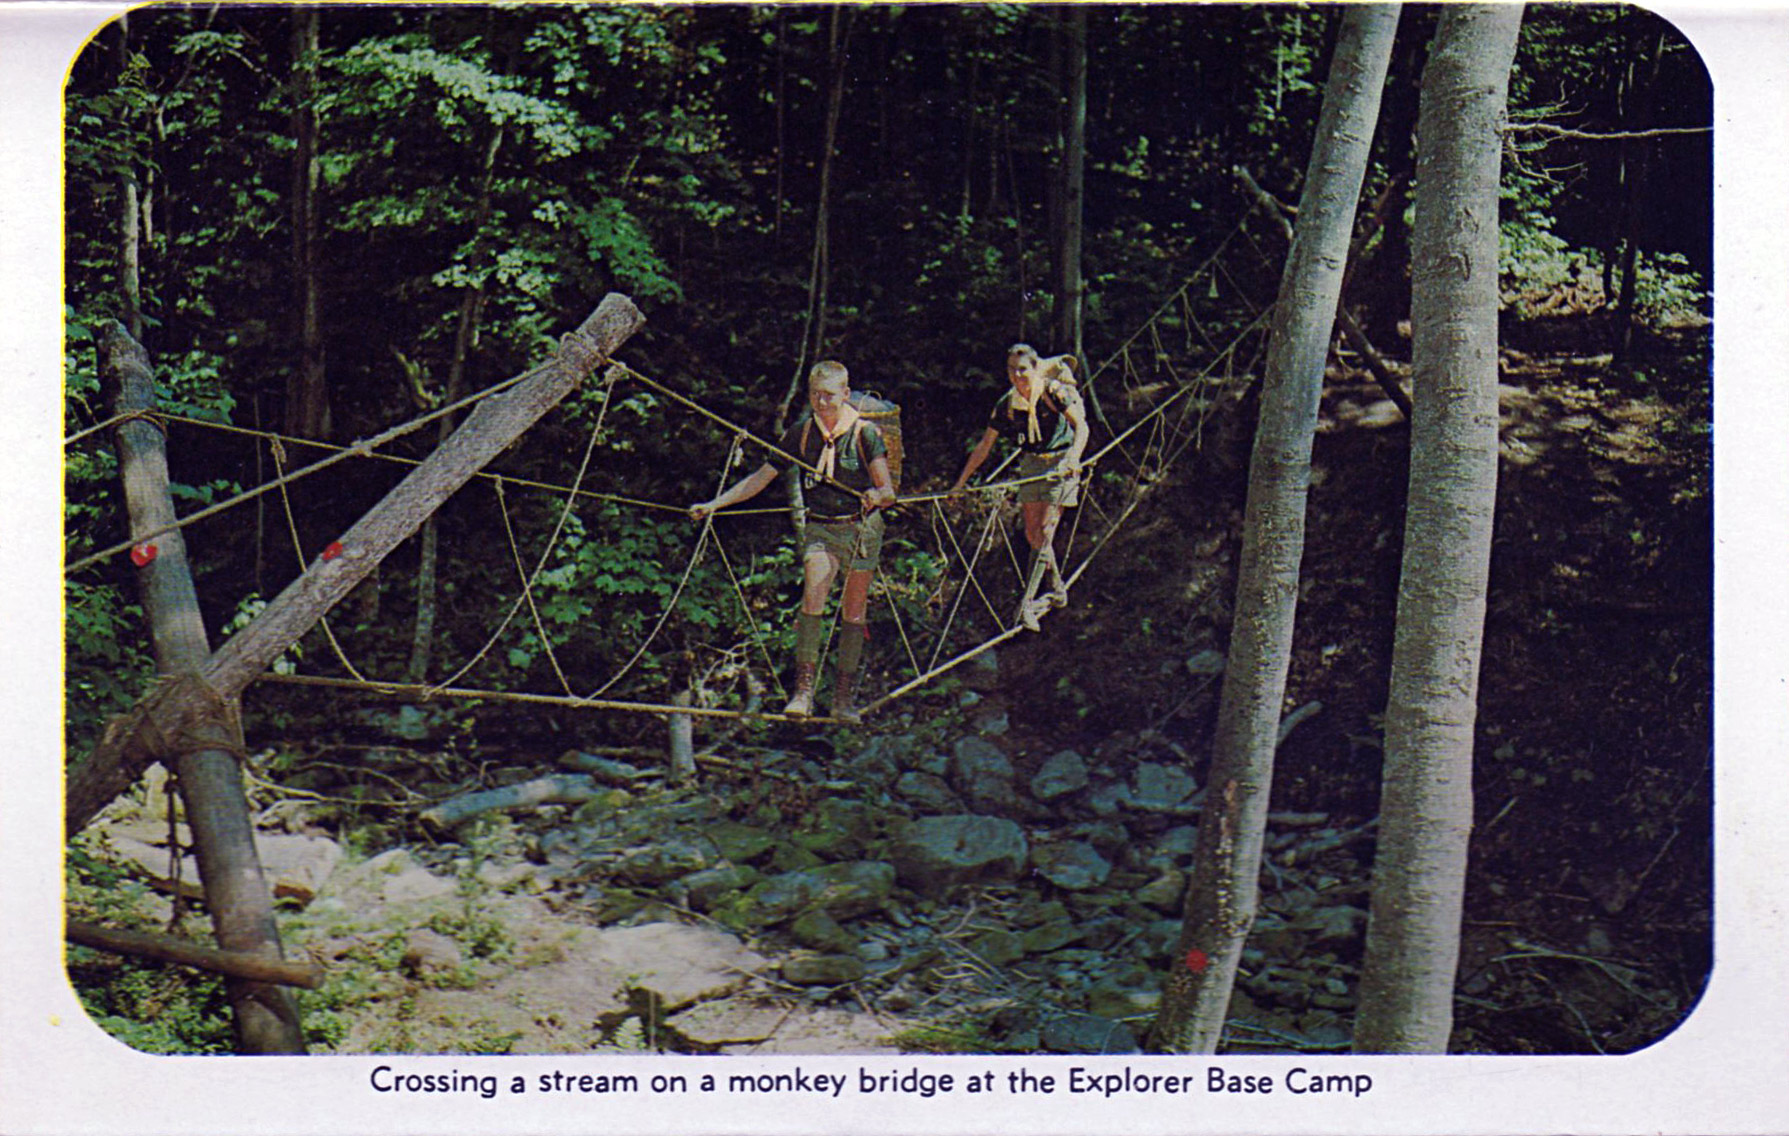 Crossing a stream on a monkey bridge at the Explorer Base Camp